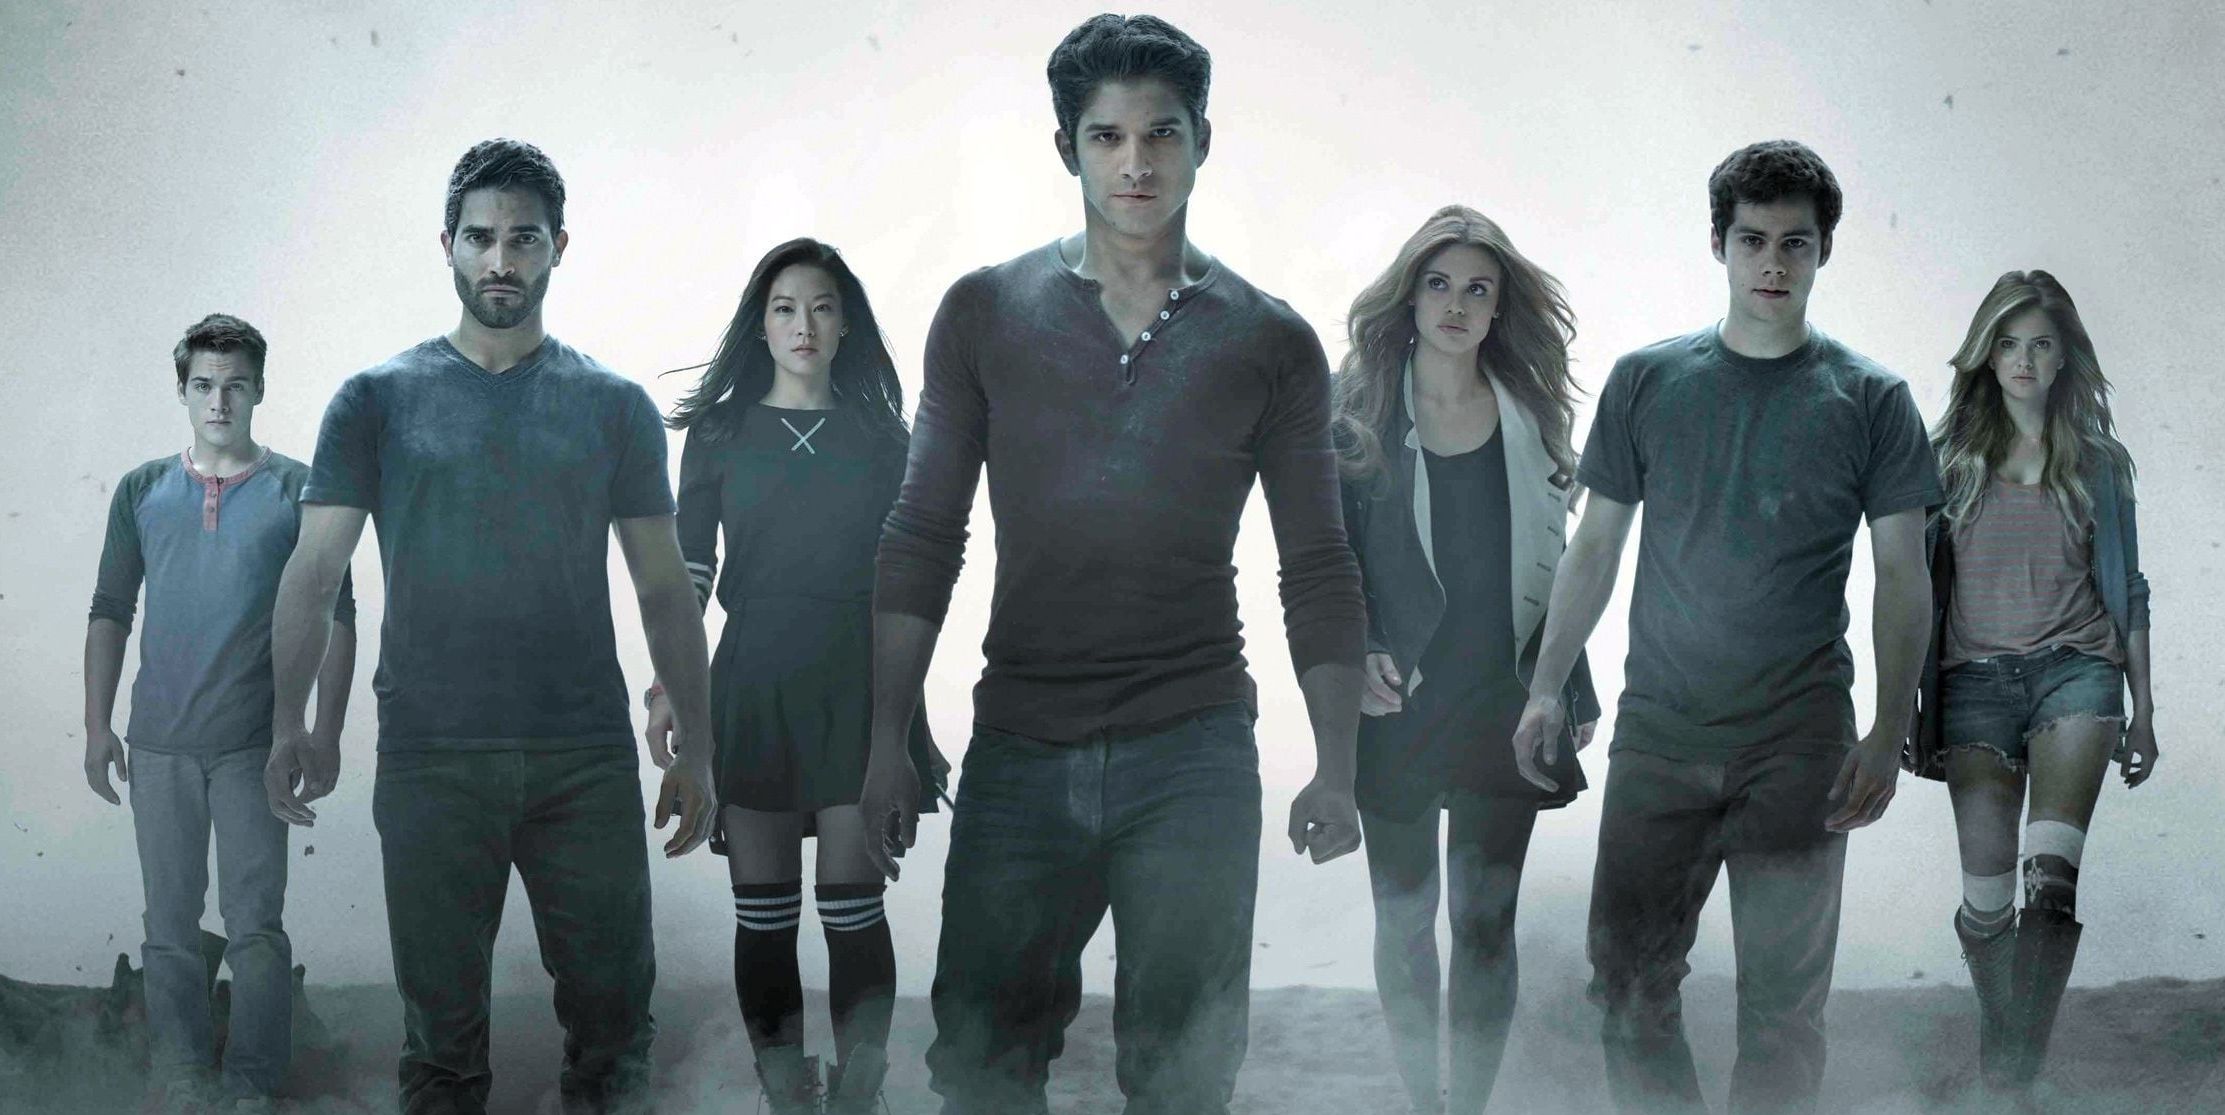 SDCC Sarah Michelle Gellar Joins Teen Wolf Creator and Cast in Hall H